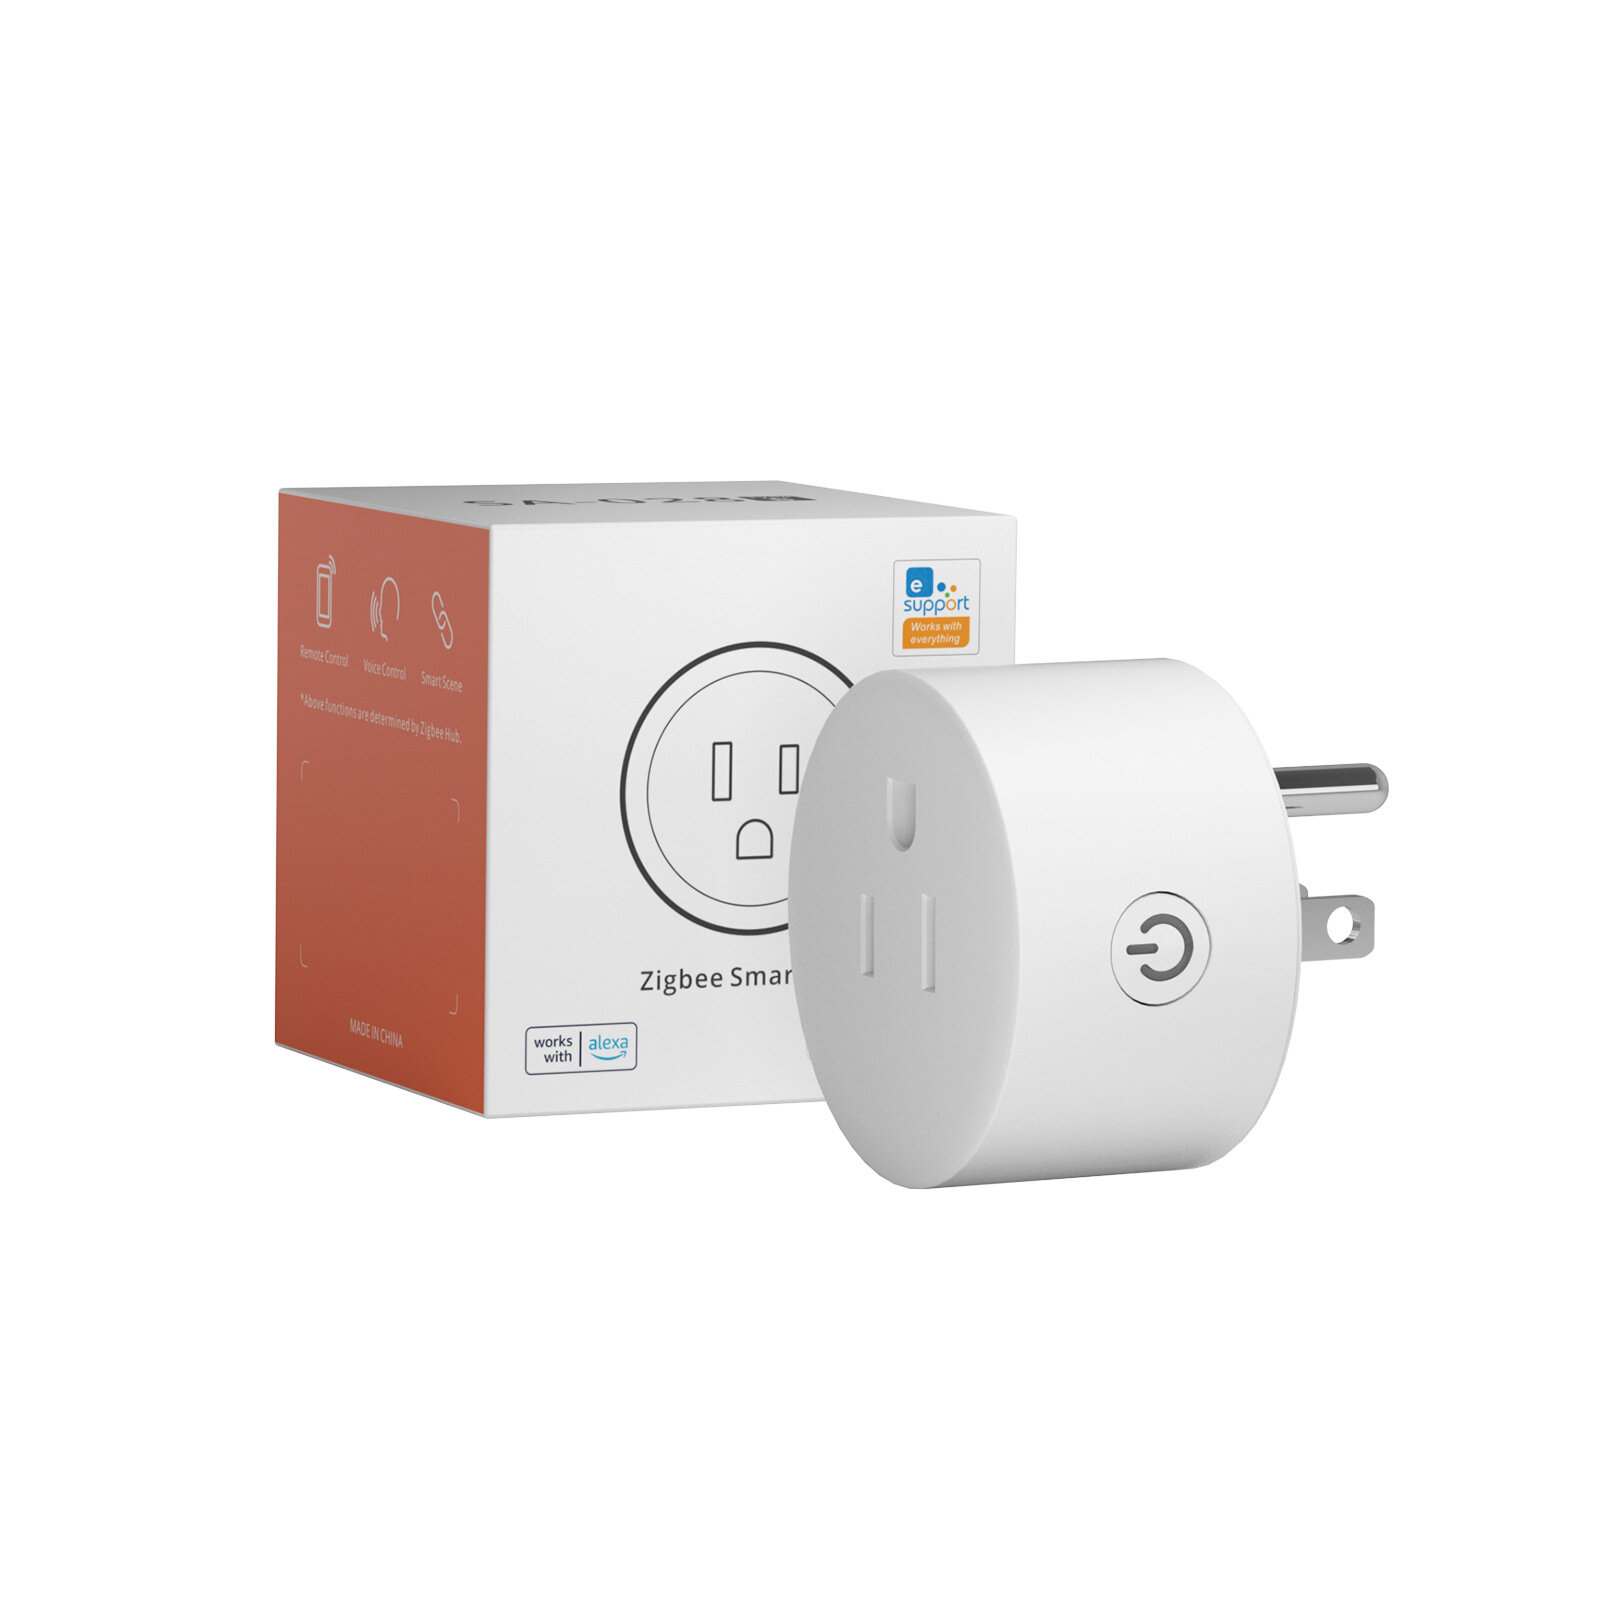 

Zigbe3.0 10A Socket American Standard Outlet APP Remote Monitoring Voice Control Work with Alexa Google